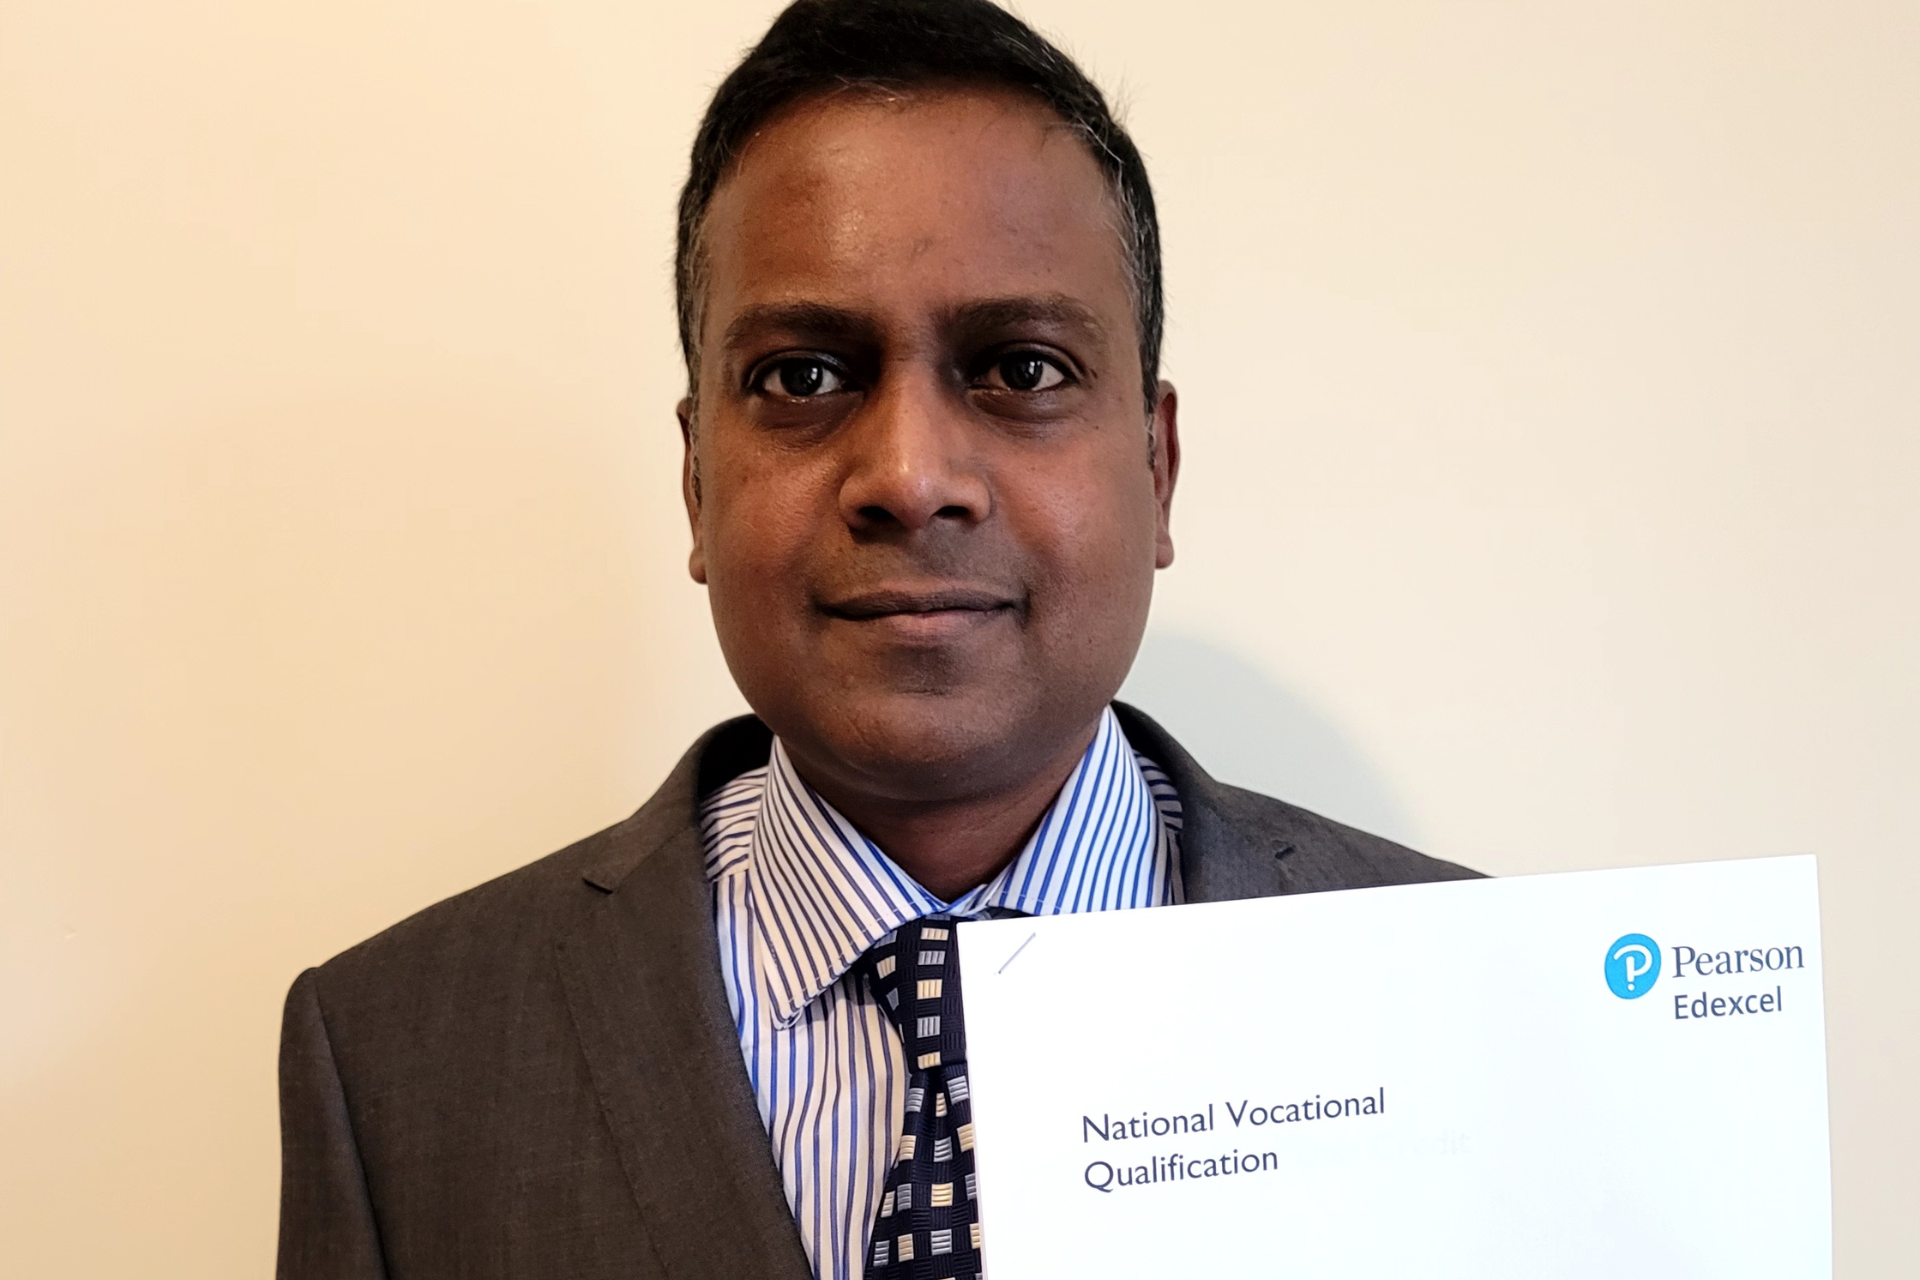 a photo of a man in a suit holding a certificate looking into the camera